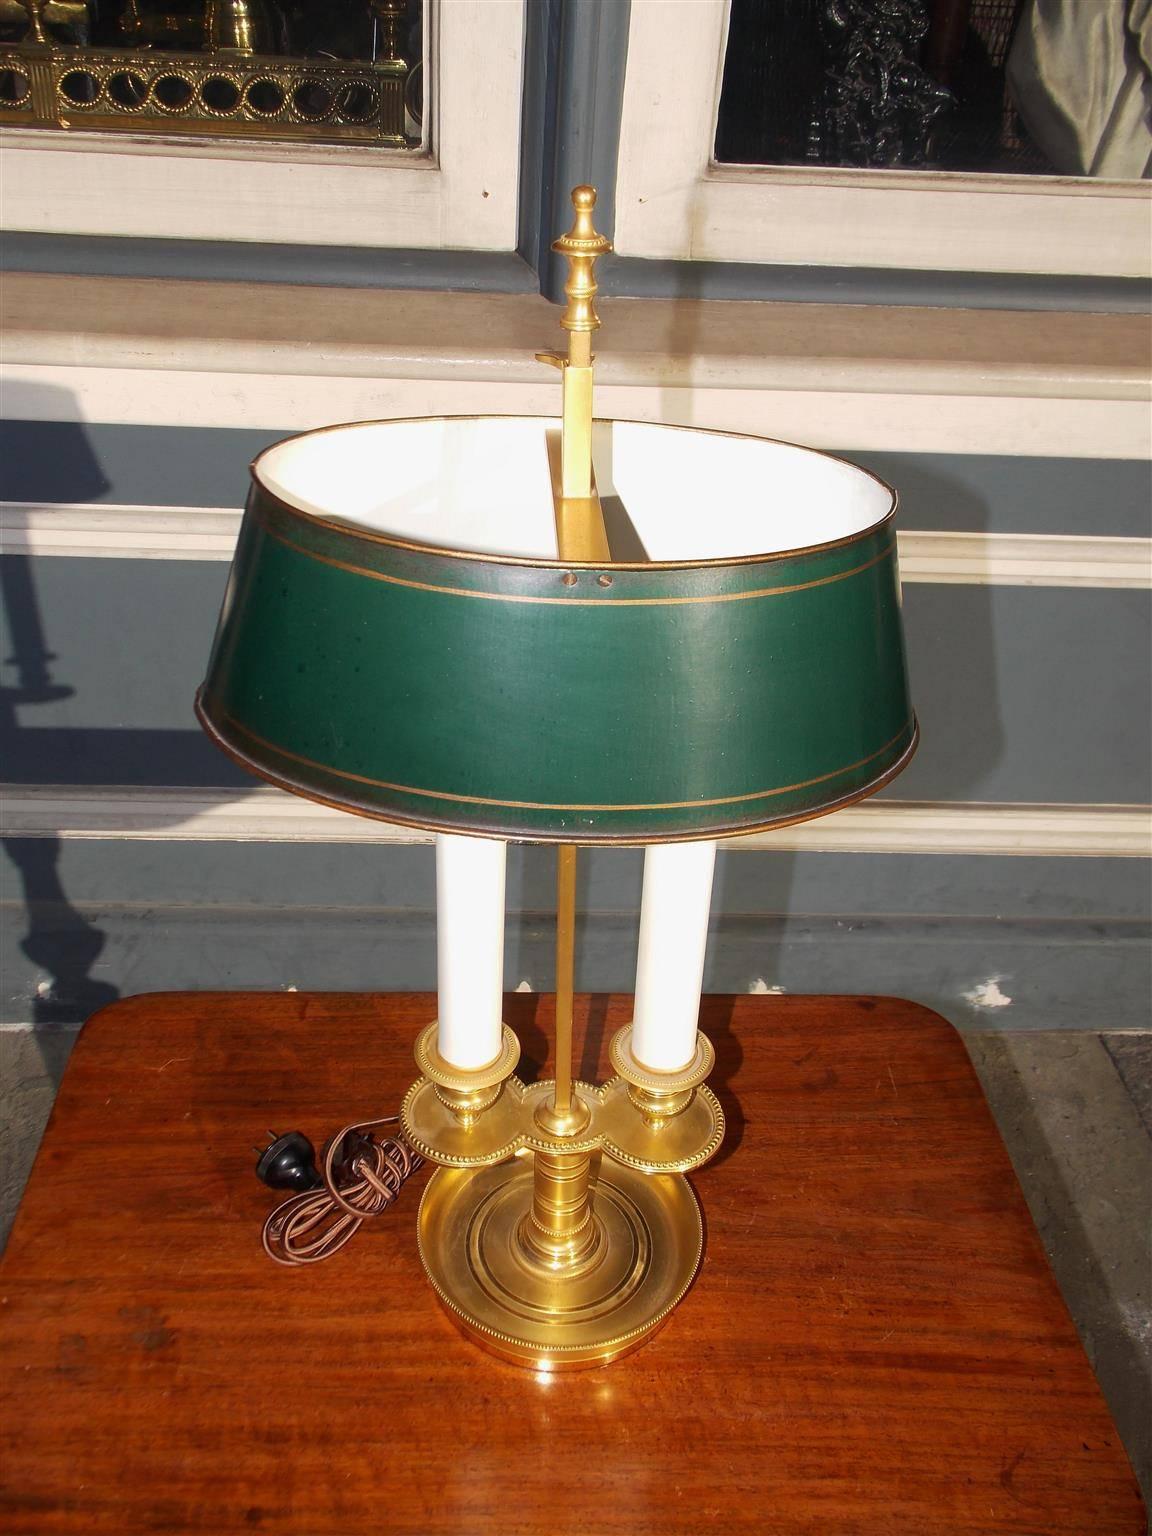 French brass and tole bouillotte table lamp with an centered urn finial , adjustable oval hand-painted and gilt tole shade, two flanking lights, decorative hand chased bead work, and resting on a circular molded base. Early 19th century. Originally